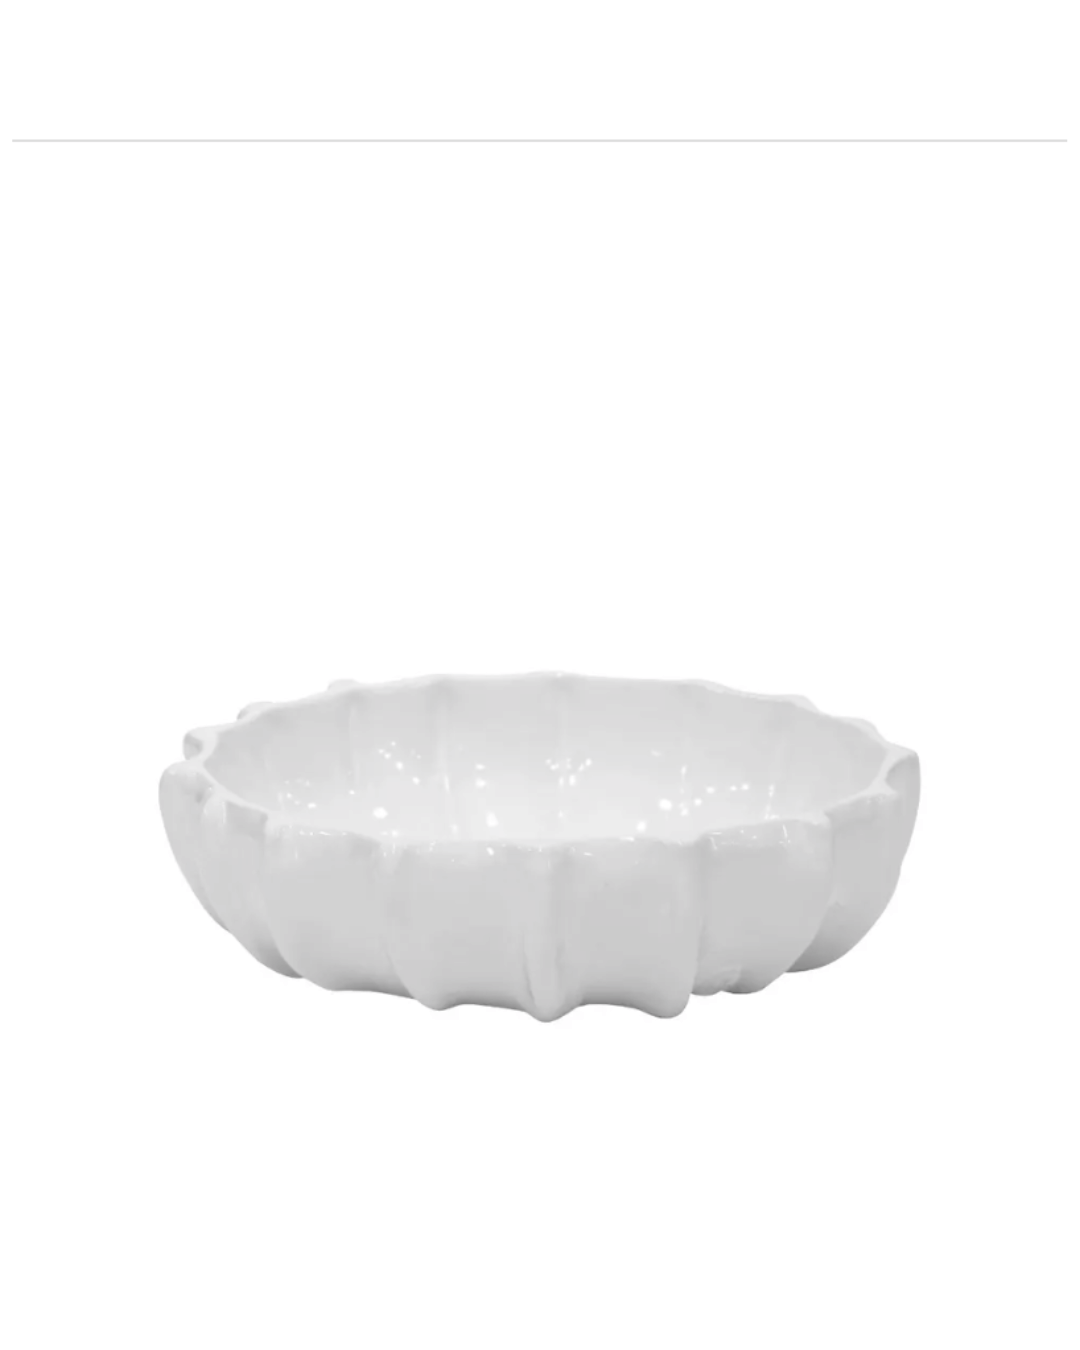 A white, ceramic Bowl No. 727 by Montes Doggett shaped like a flower with petals, set against a plain white background in a Scottsdale Arizona bungalow.